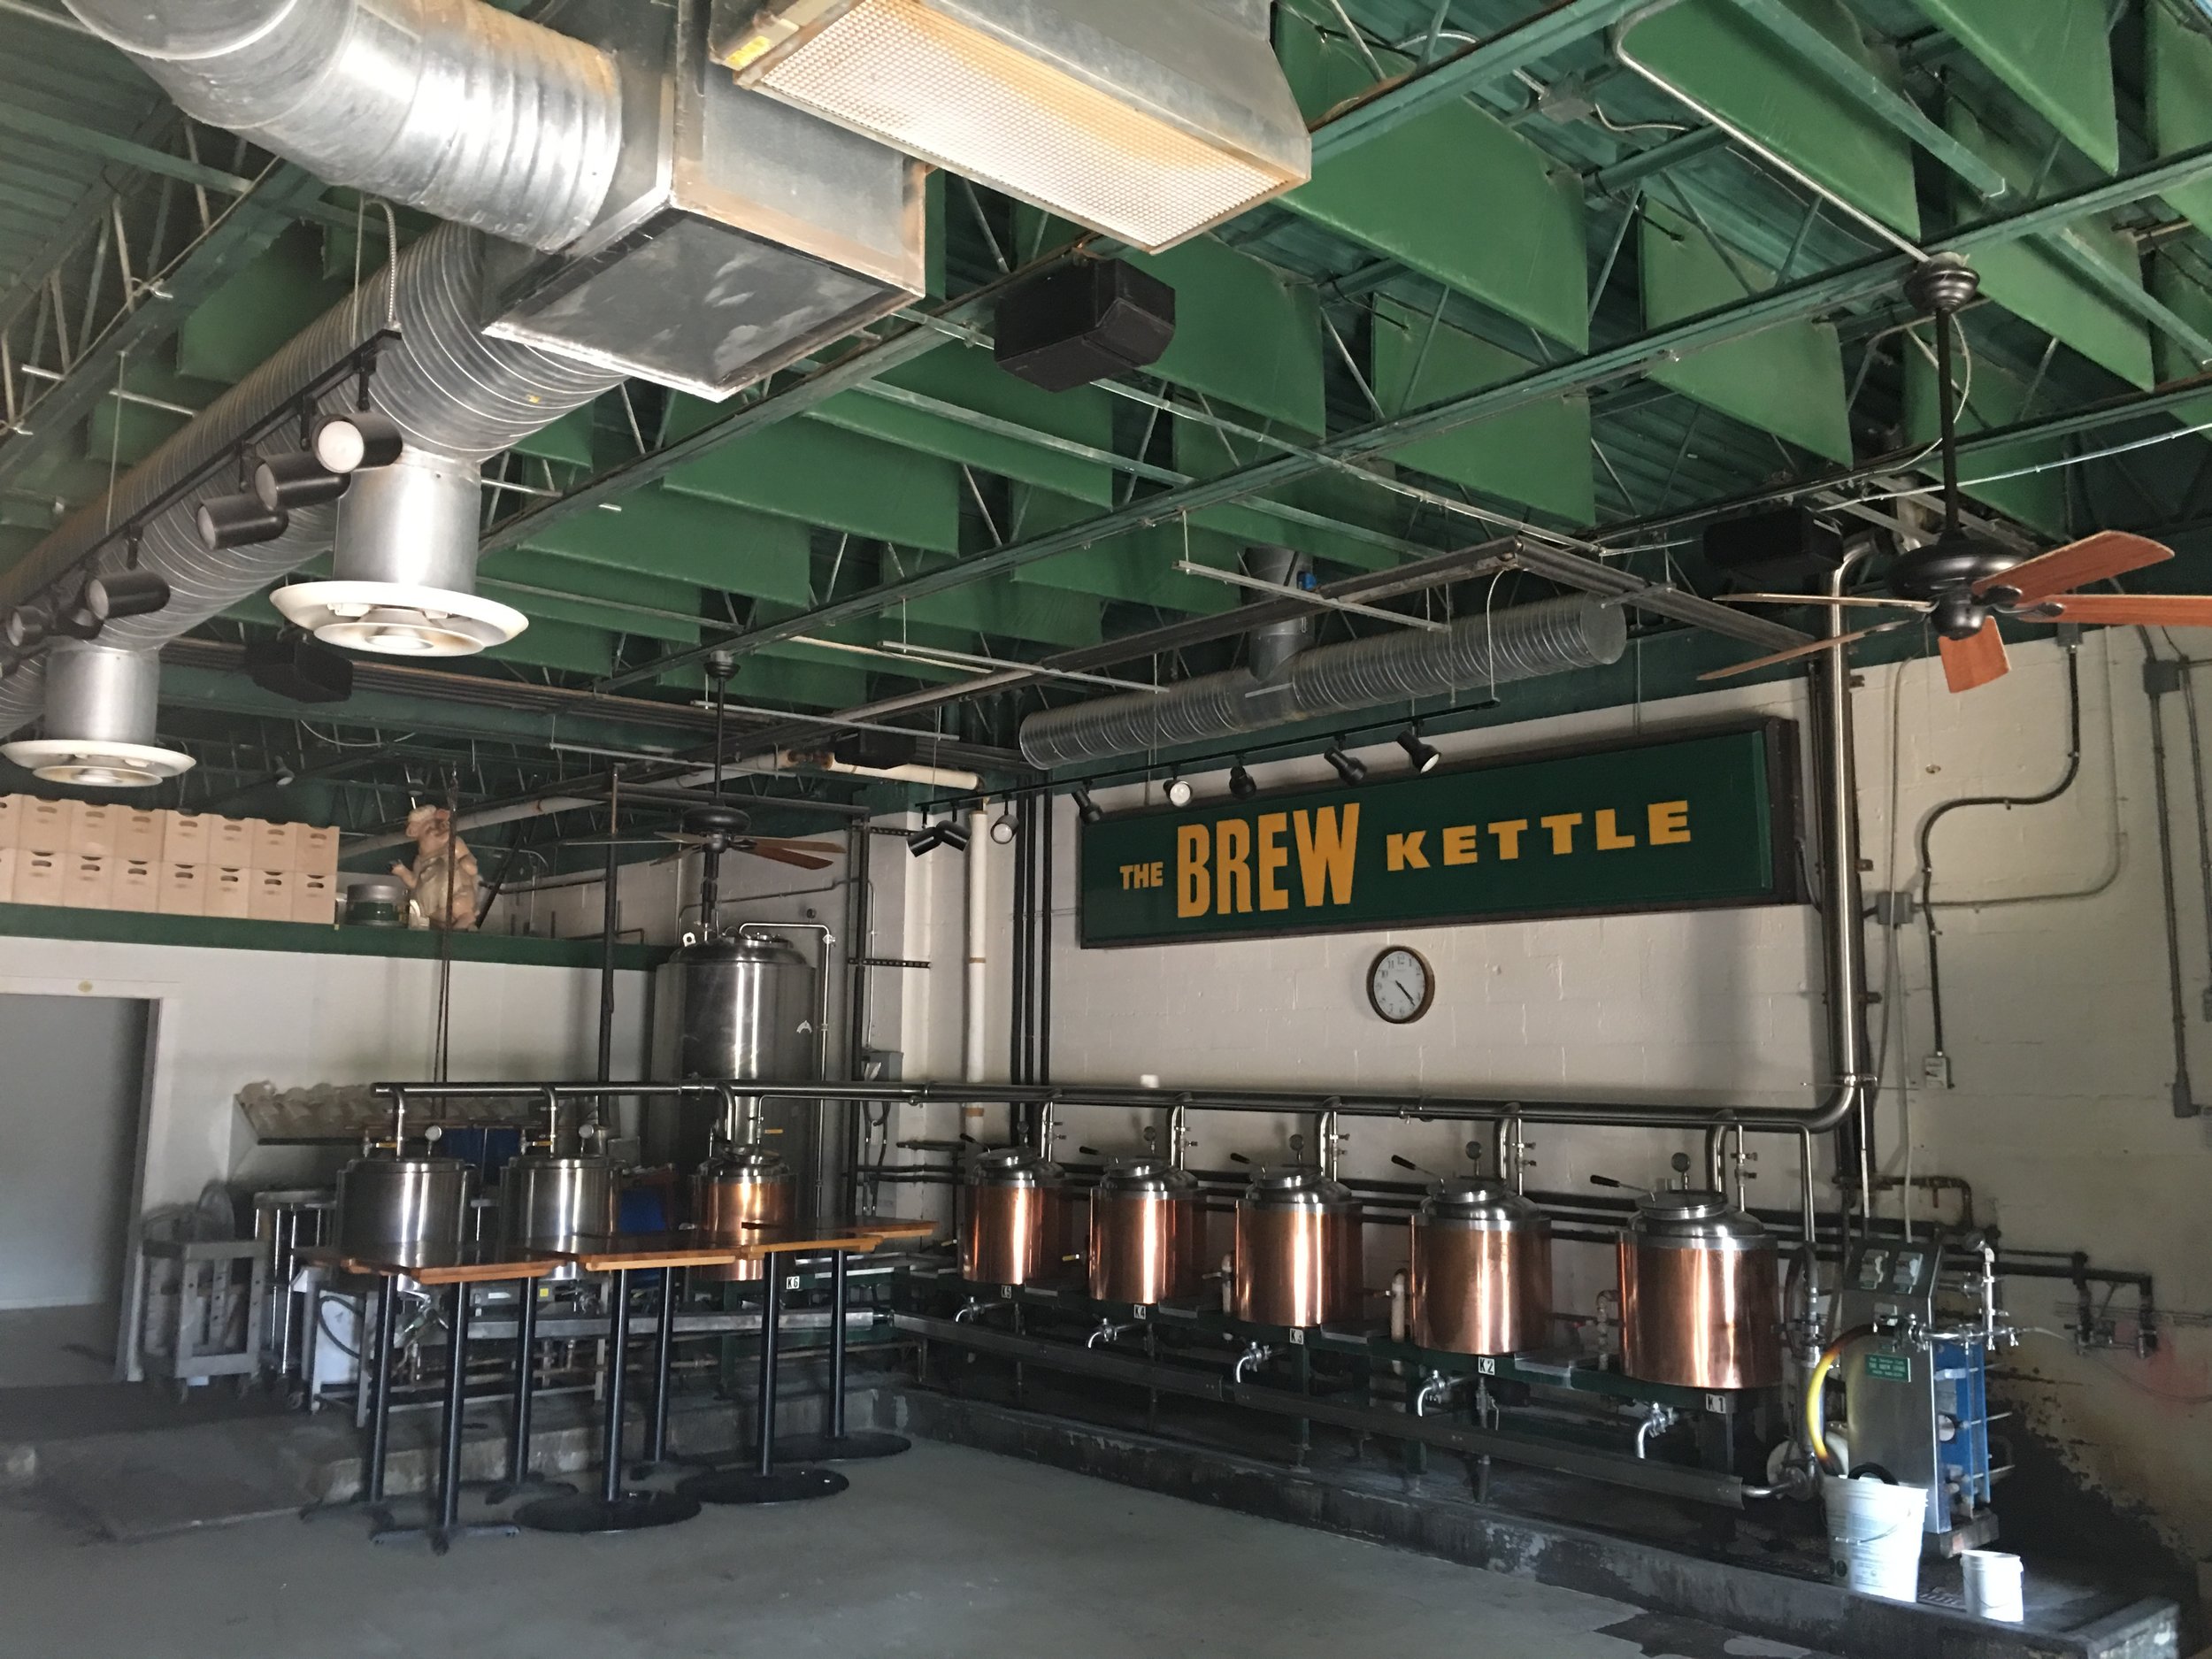 The Brew Kettle Brewery